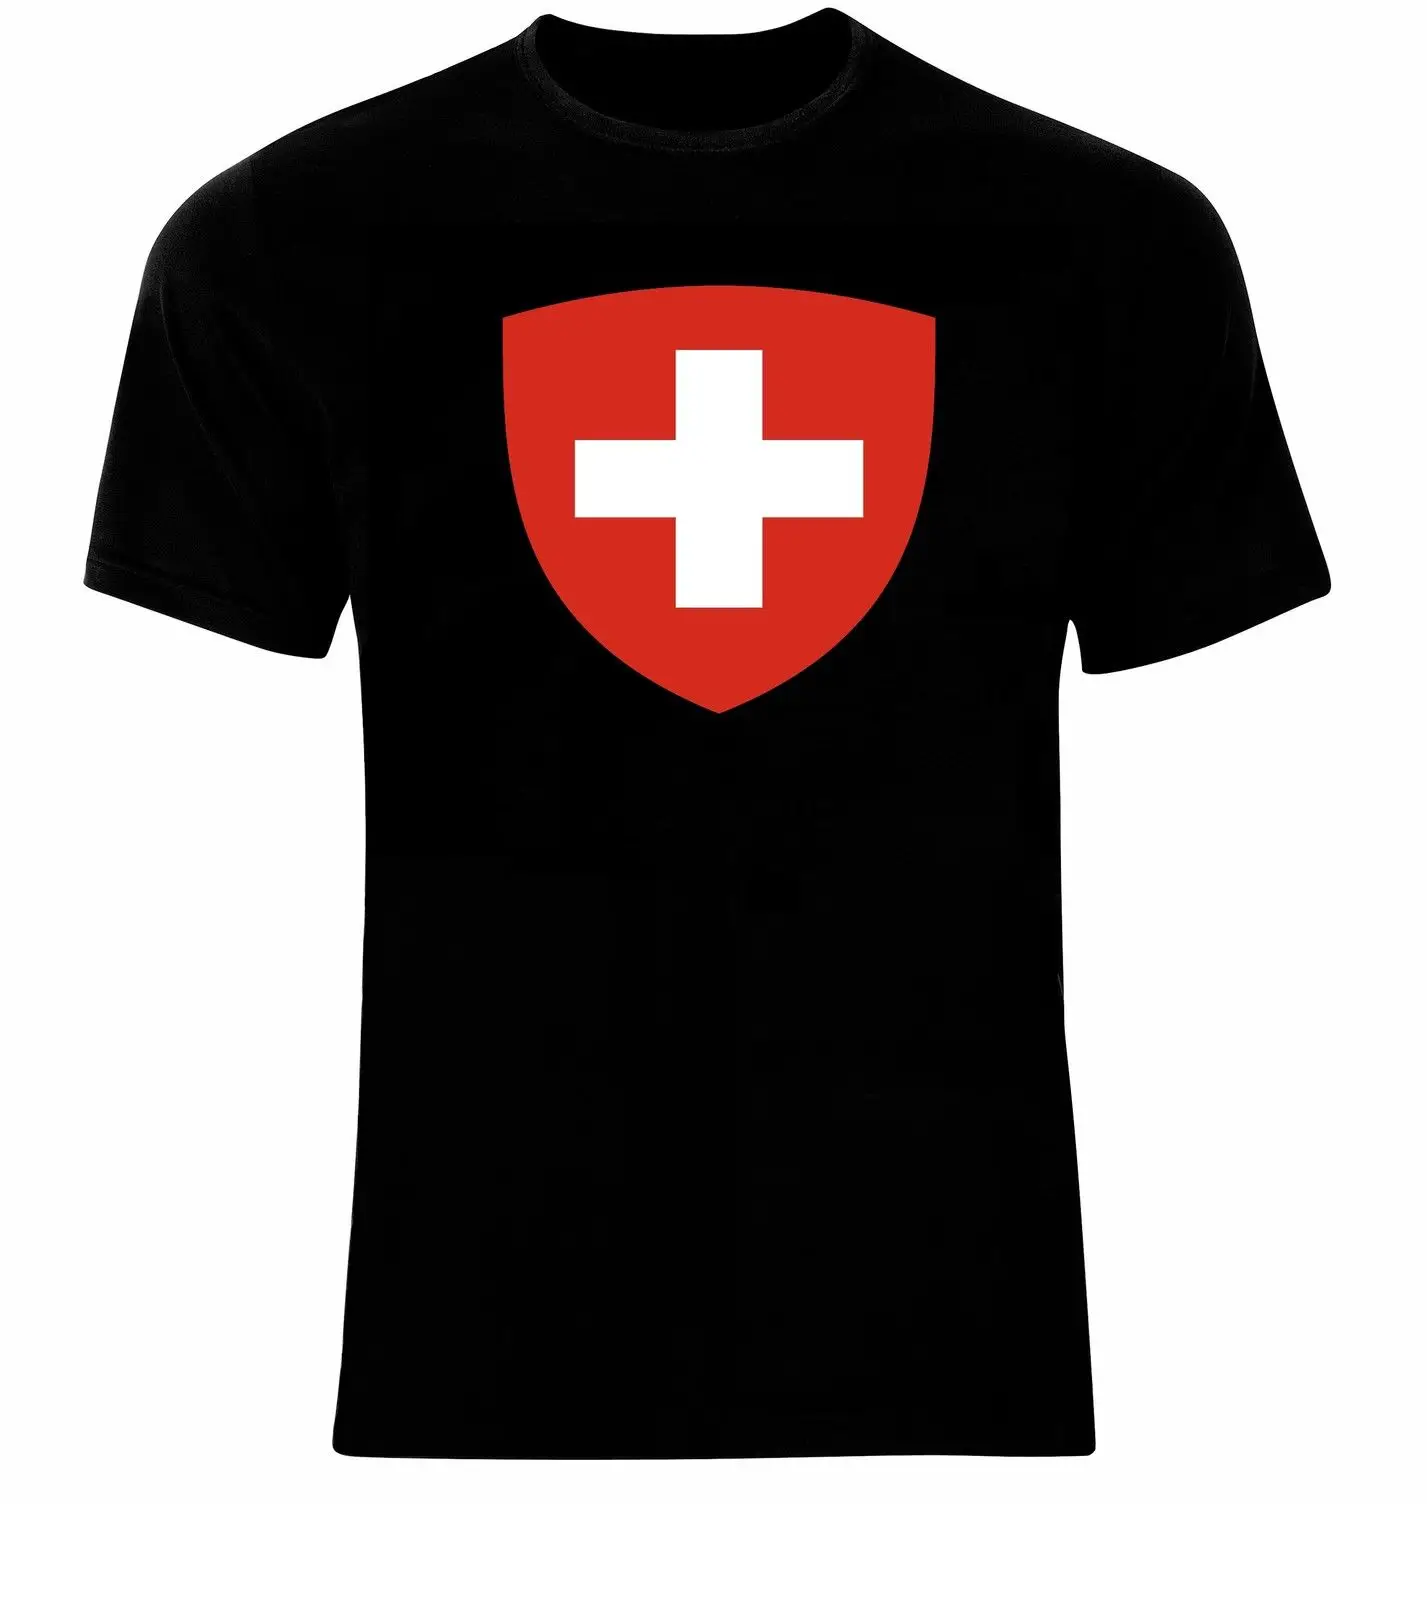 

Coat of Arms Of The Switzerland Swiss Arms Flag T-Shirt Cotton O-Neck Short Sleeve Men's T Shirt New Size S-3XL